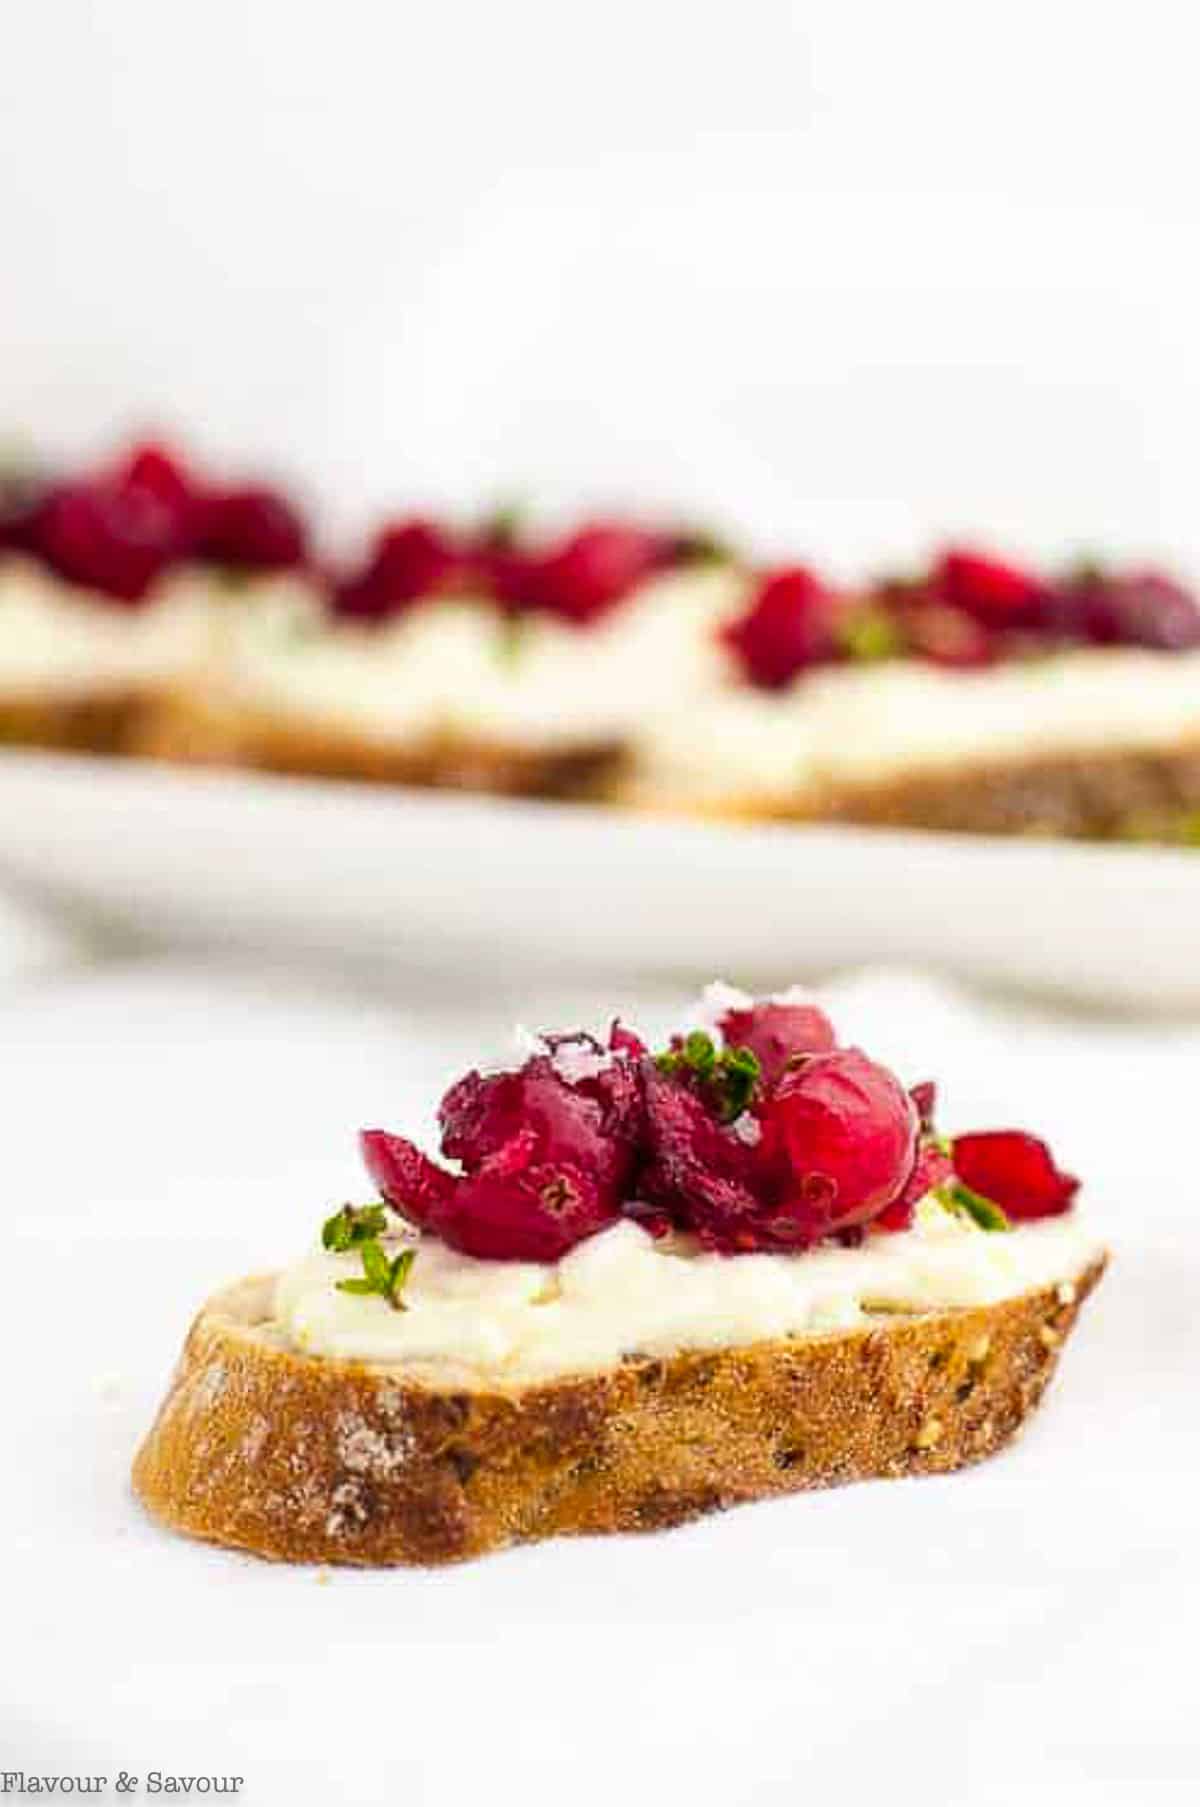 A crostini appetizer with fresh cranberries and whipped ricotta cheese.